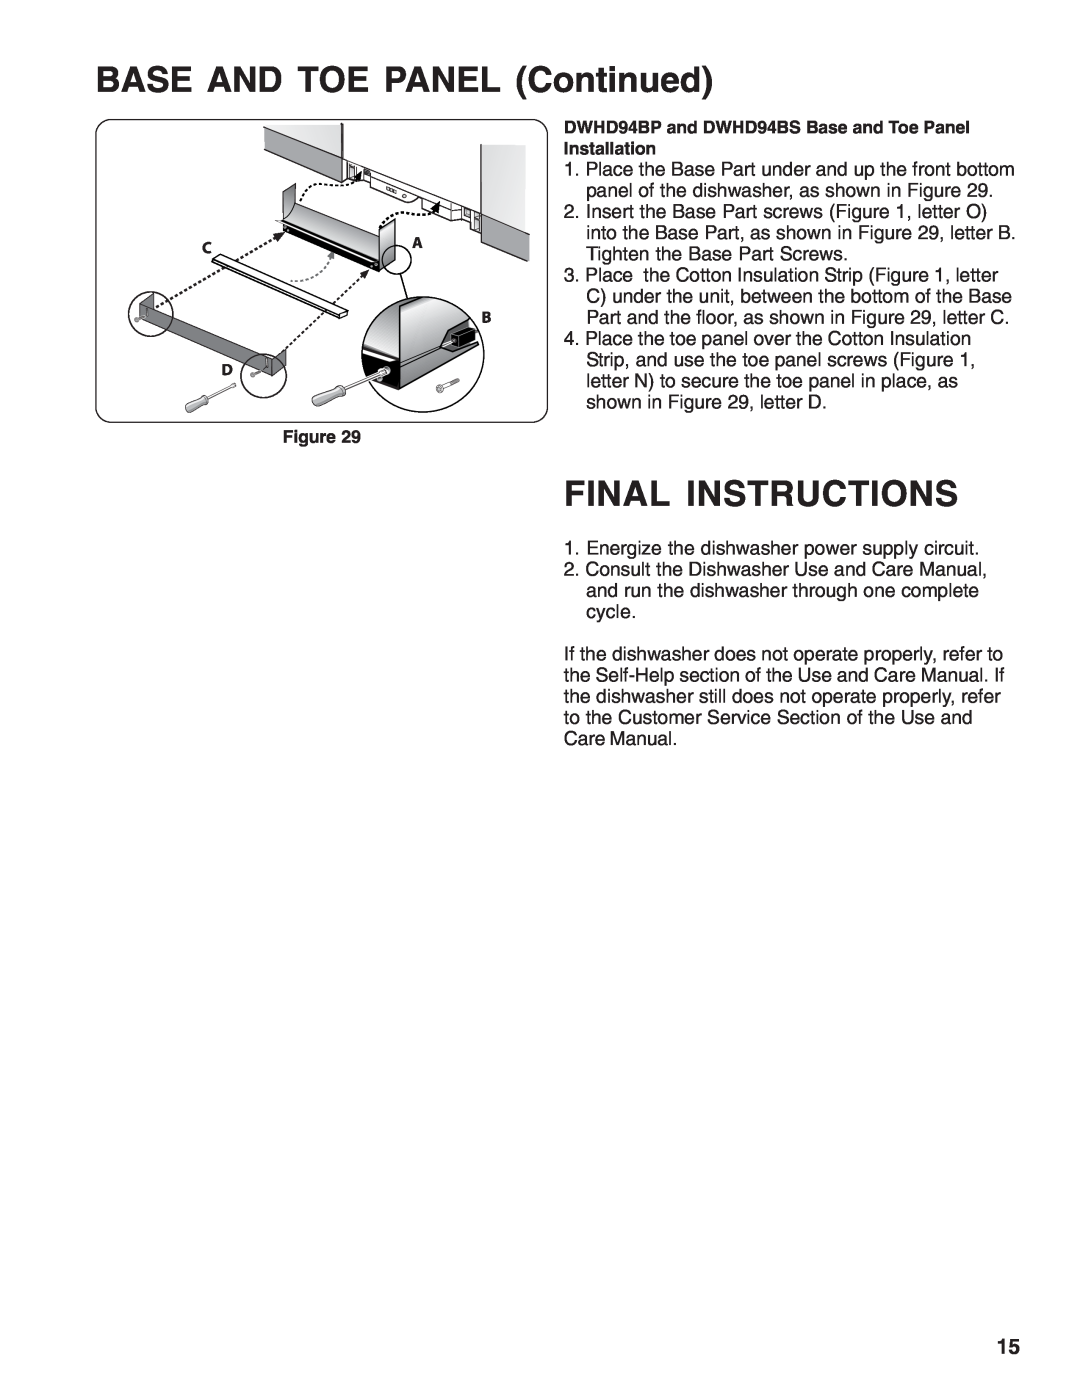 Thermador 9000039271 installation instructions BASE AND TOE PANEL Continued, Final Instructions 